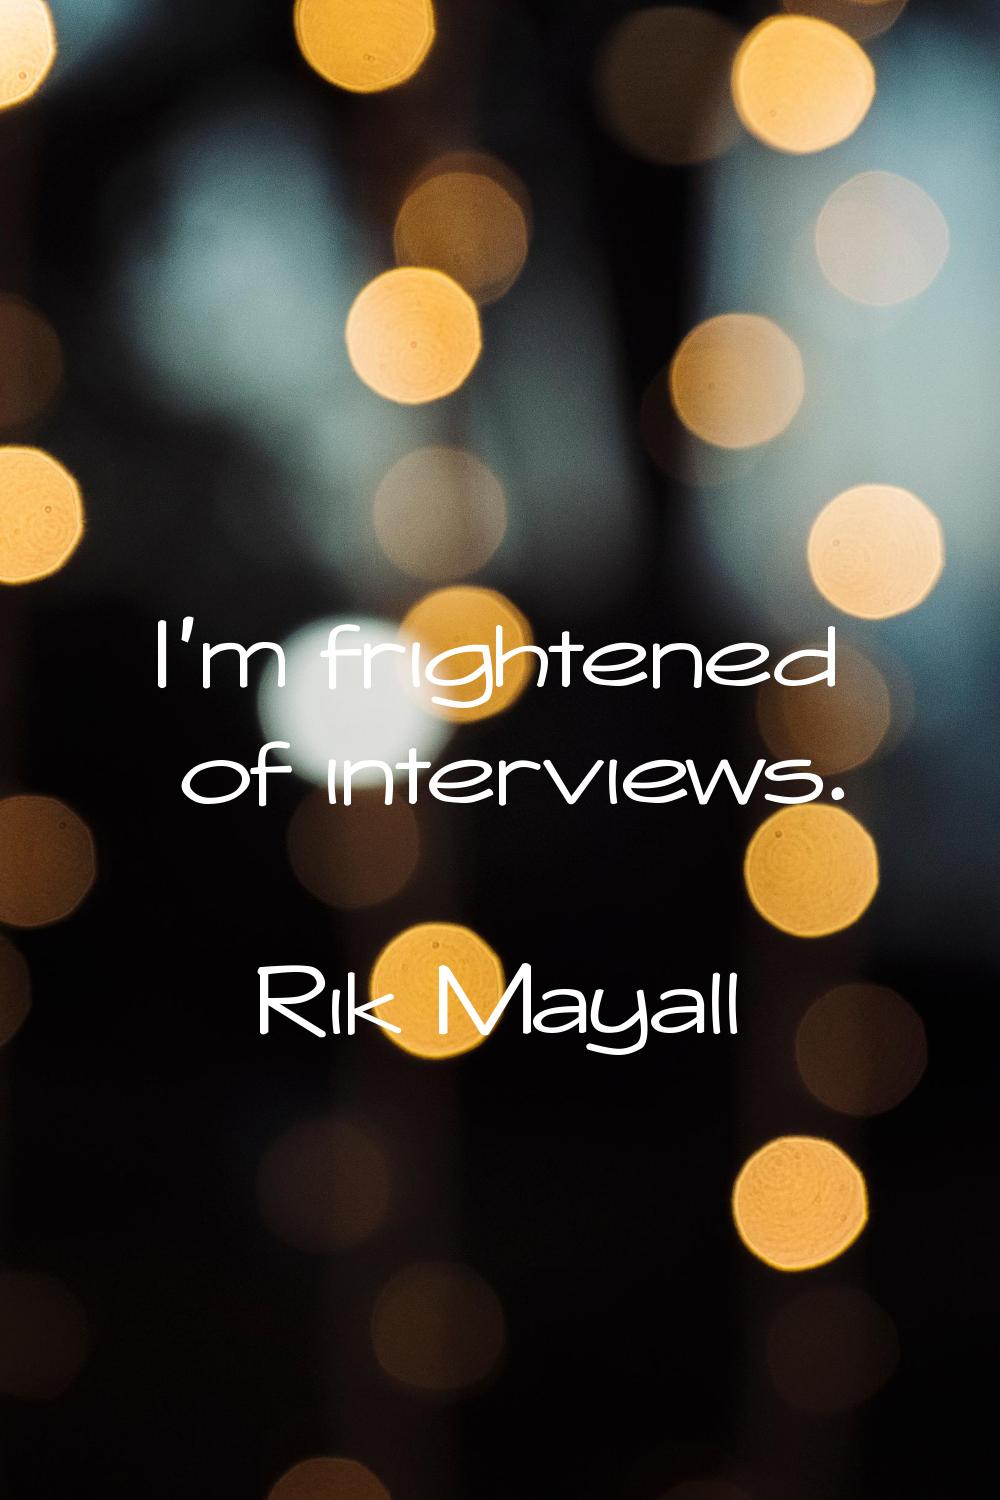 I'm frightened of interviews.